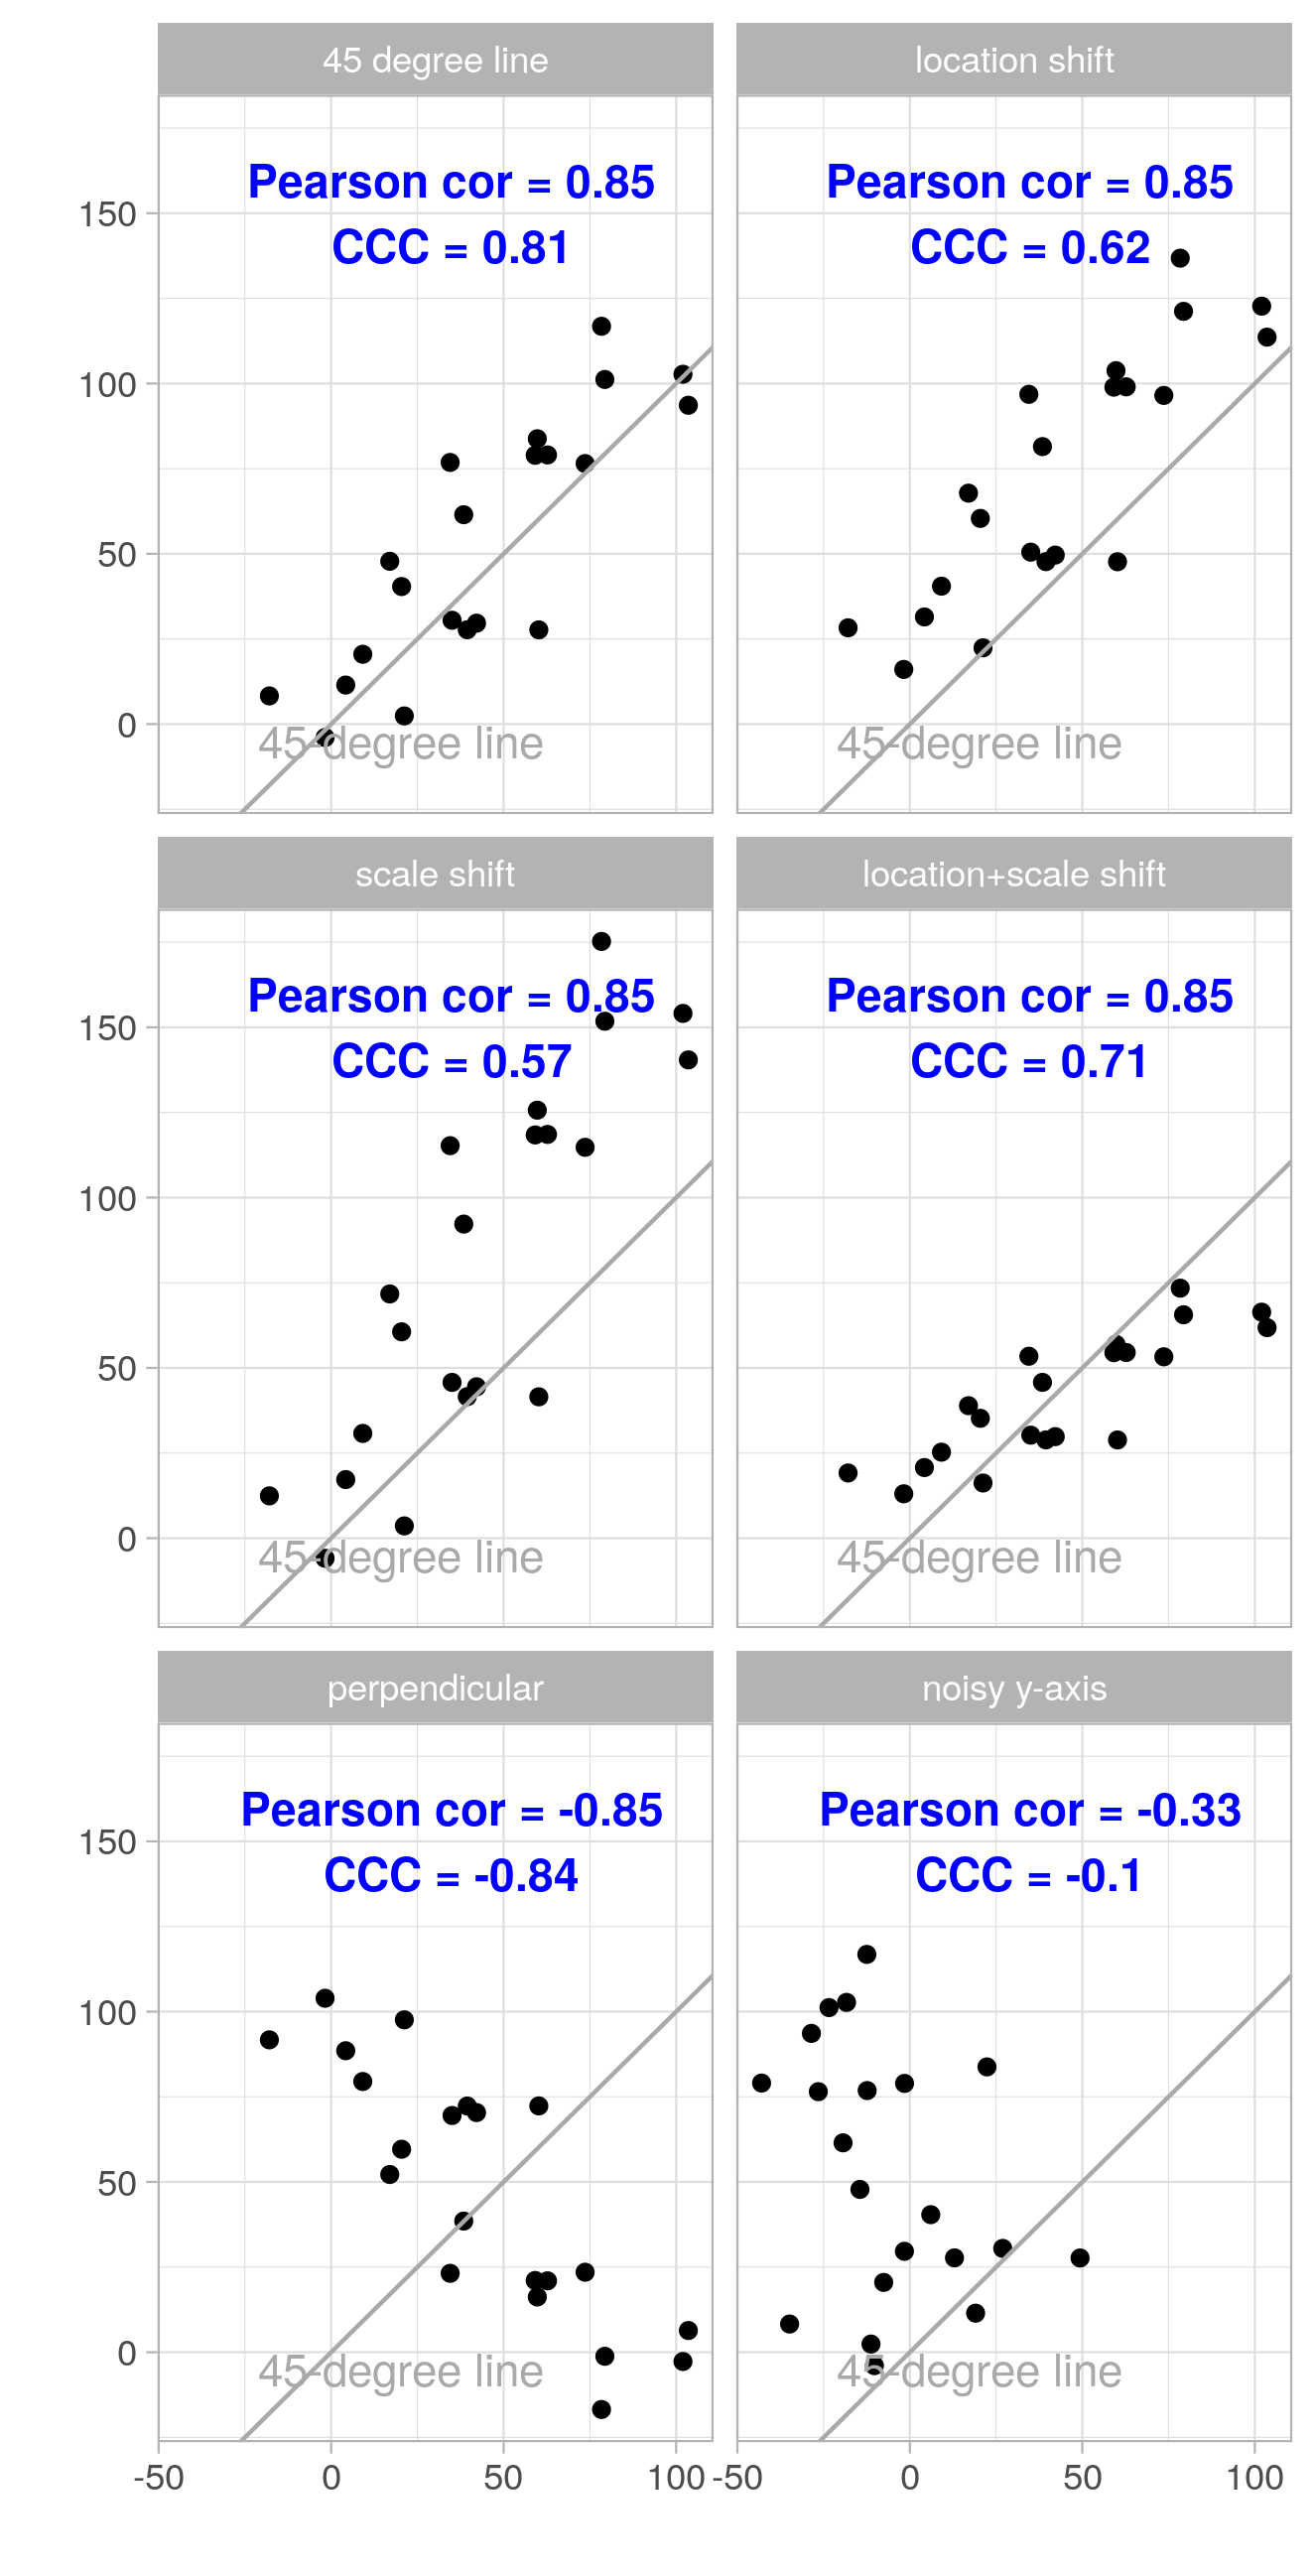 Figures of examples showing the effects of location and/or scale shift on Pearson correlation coefficient and on CCC, with addition of white noise to all observations.